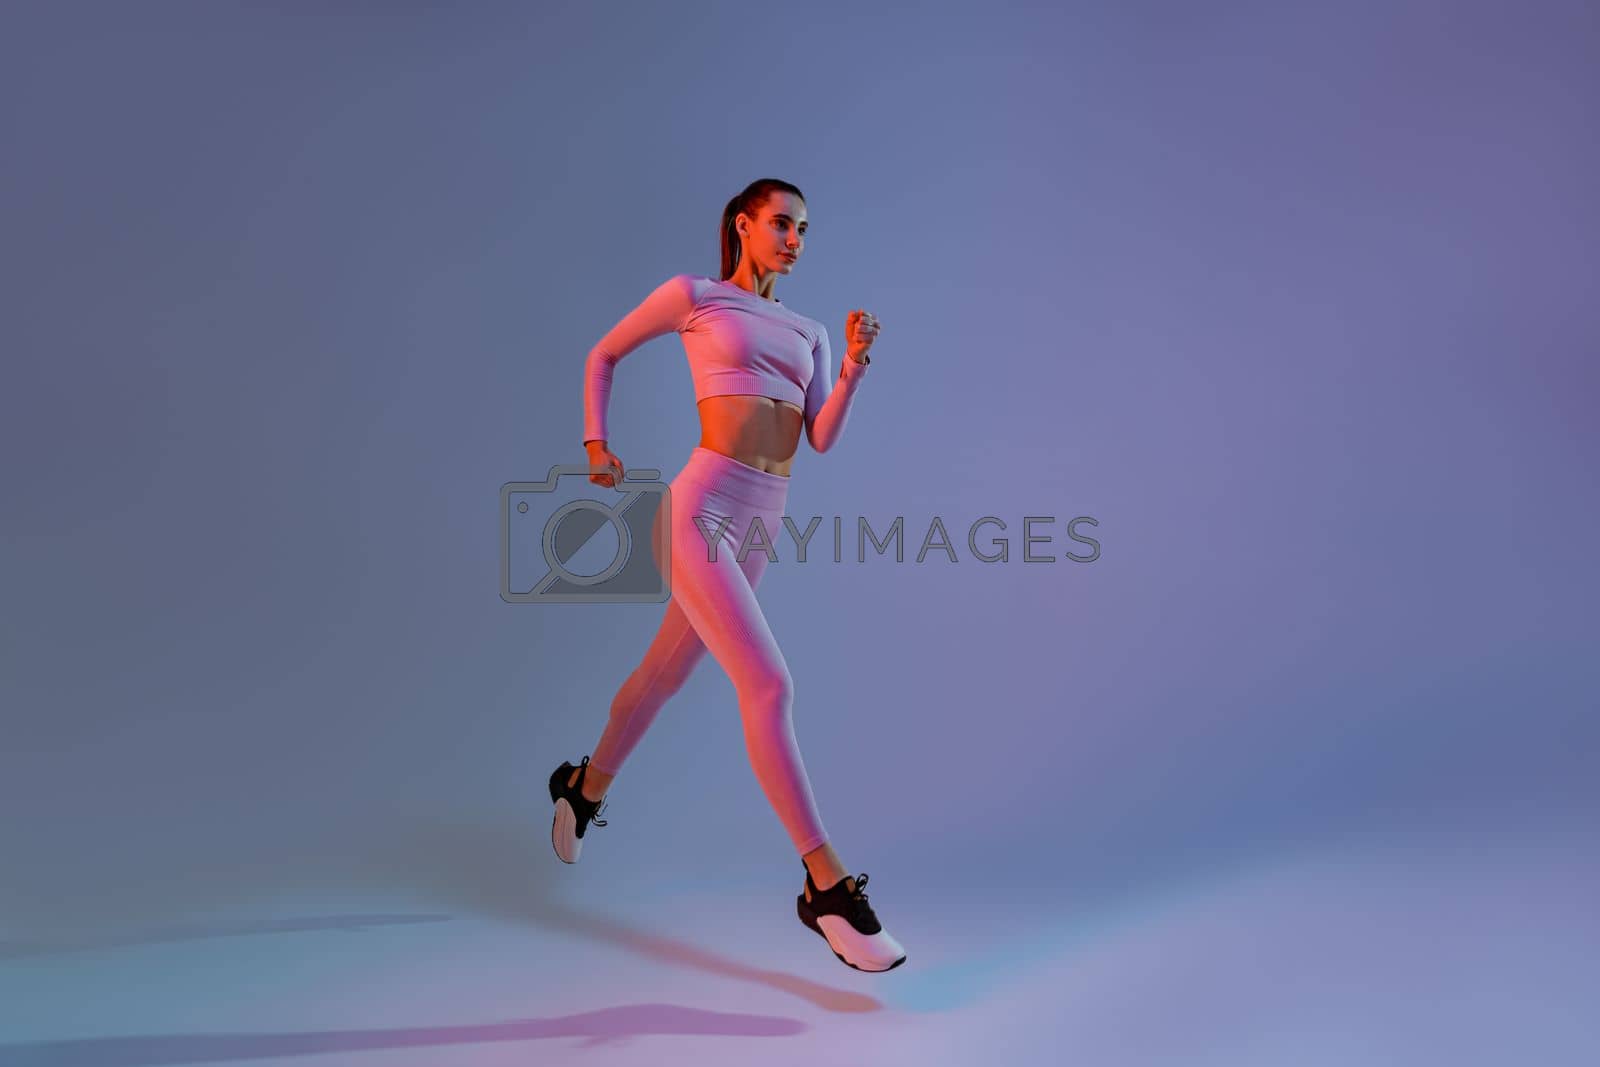 Royalty free image of Pretty sporty woman running in Mid-Air exercising during cardio workout over studio background by Yaroslav_astakhov